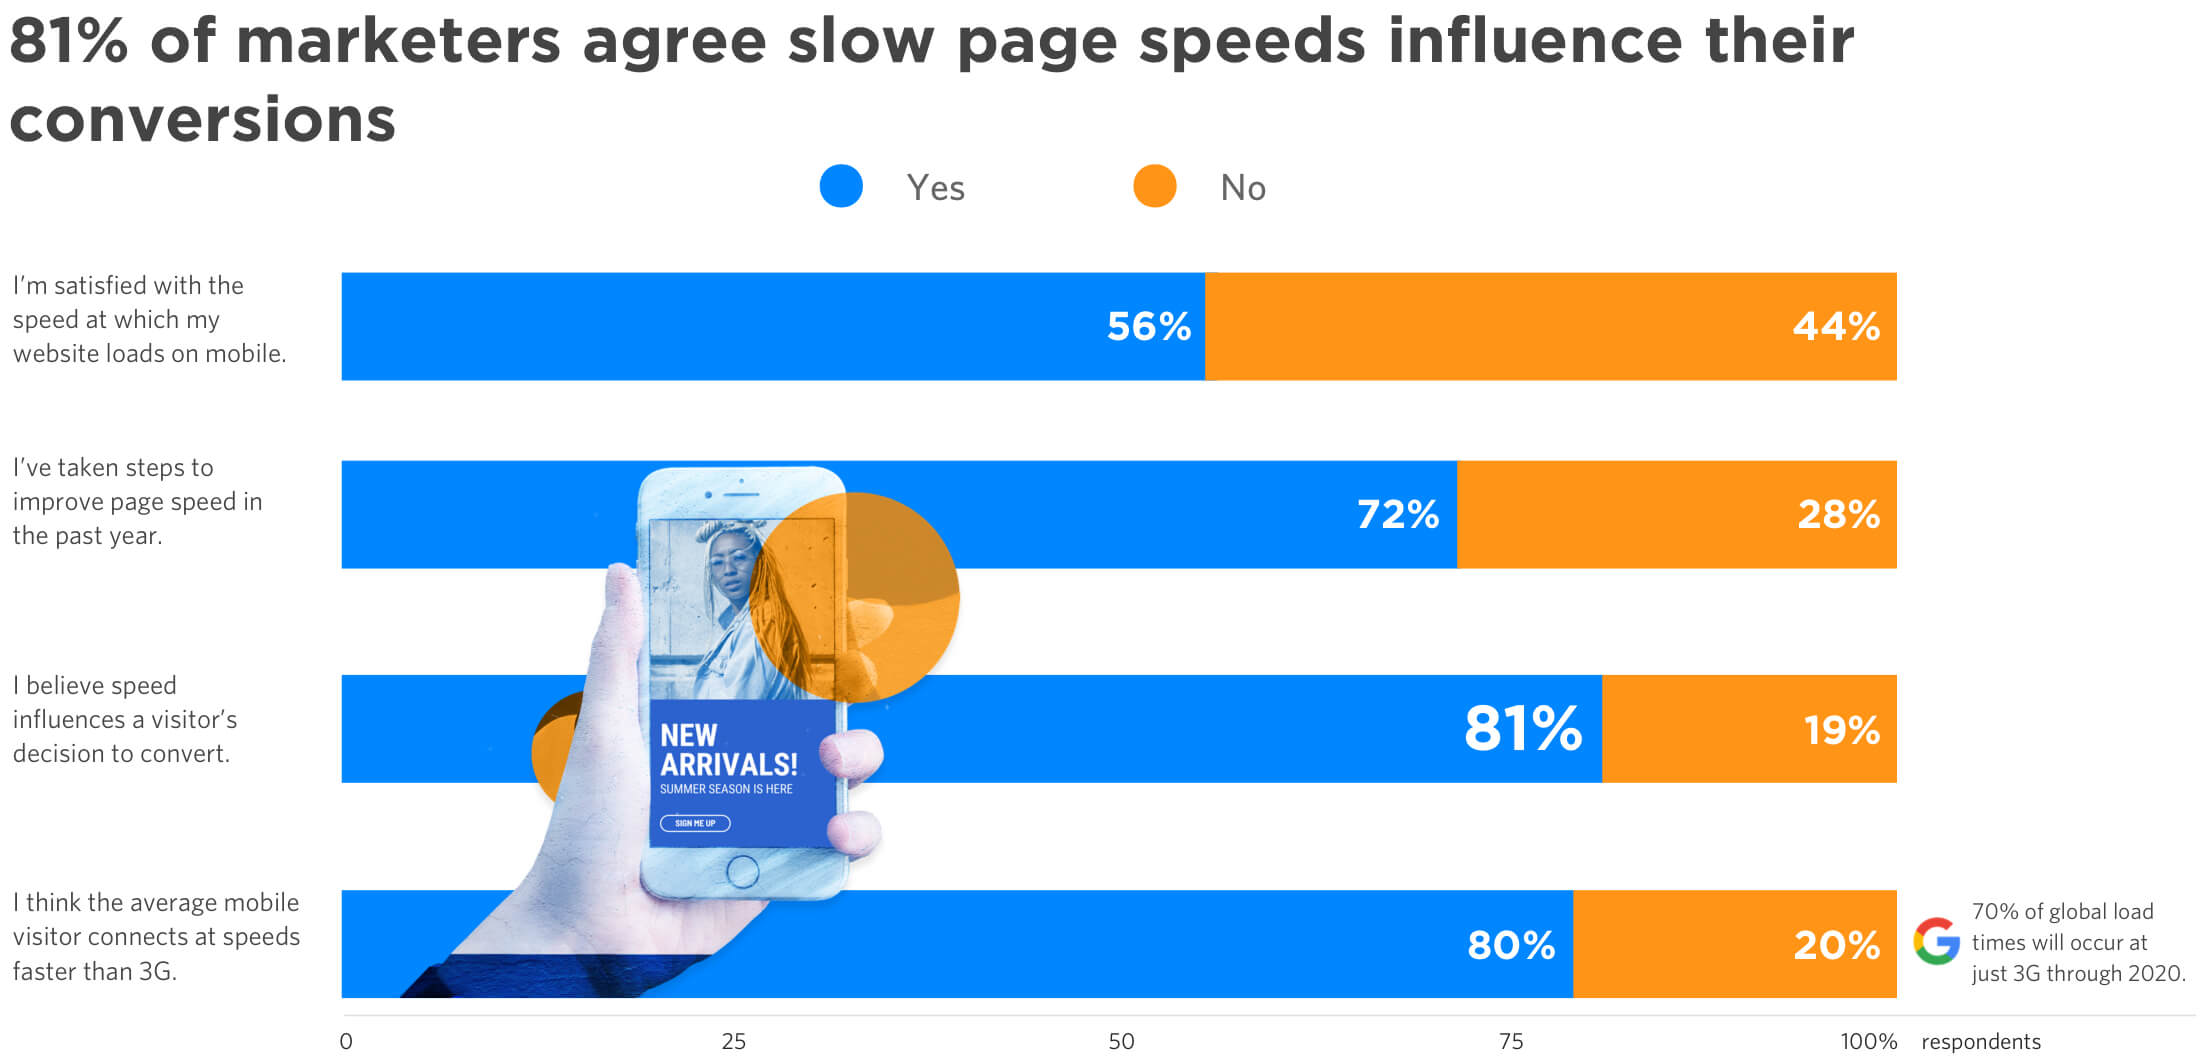 81 percent of marketers agree slow page speeds influence conversions